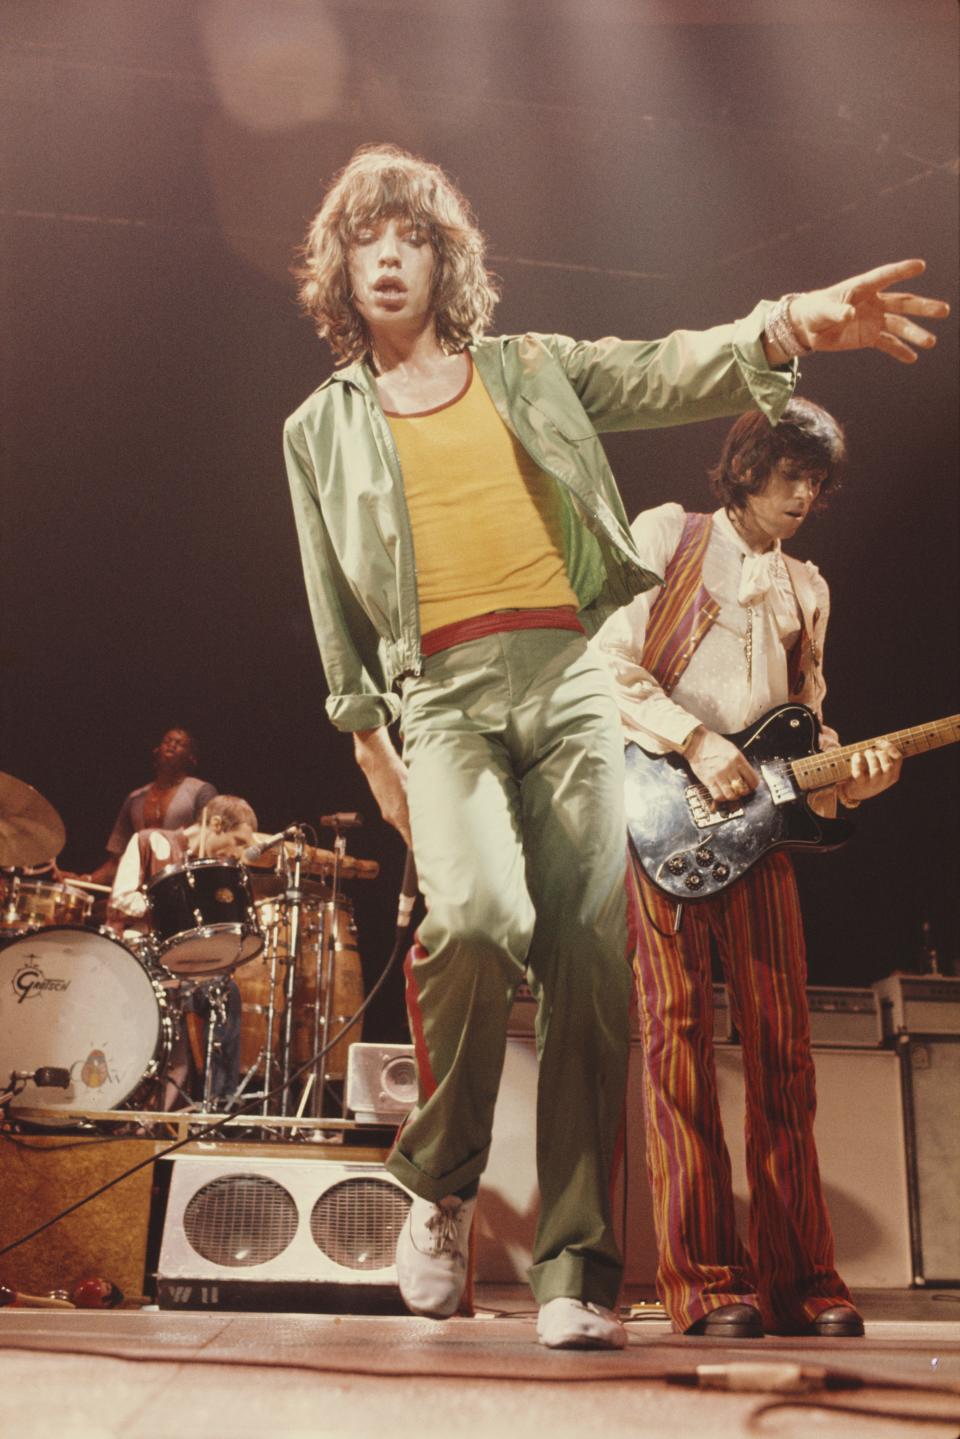 Mick Jagger in his Repettos.